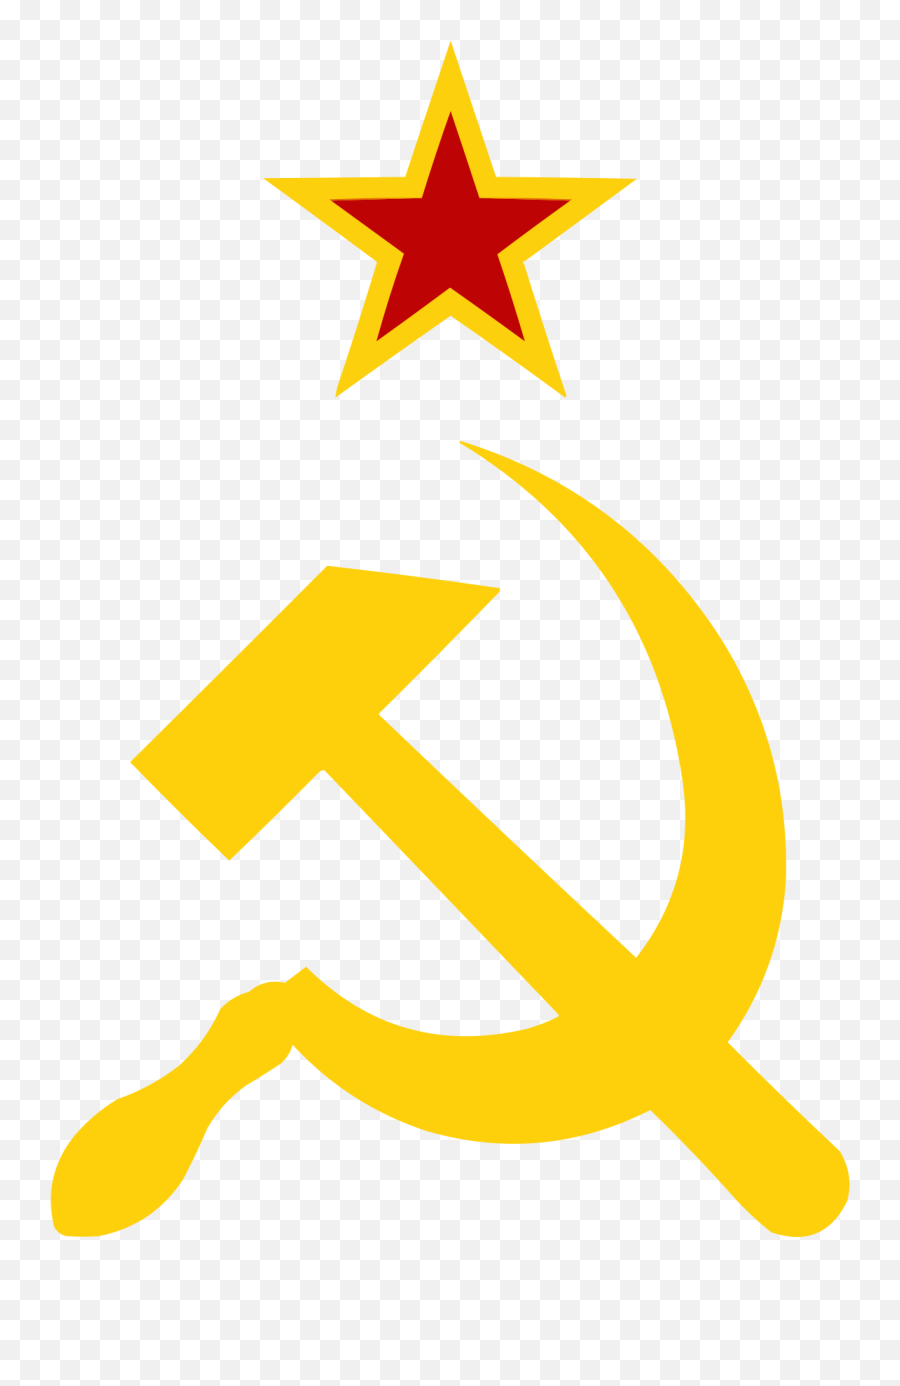 Hammer And Sickle - Wikipedia Hammer And Sickle Png,Struggle Icon